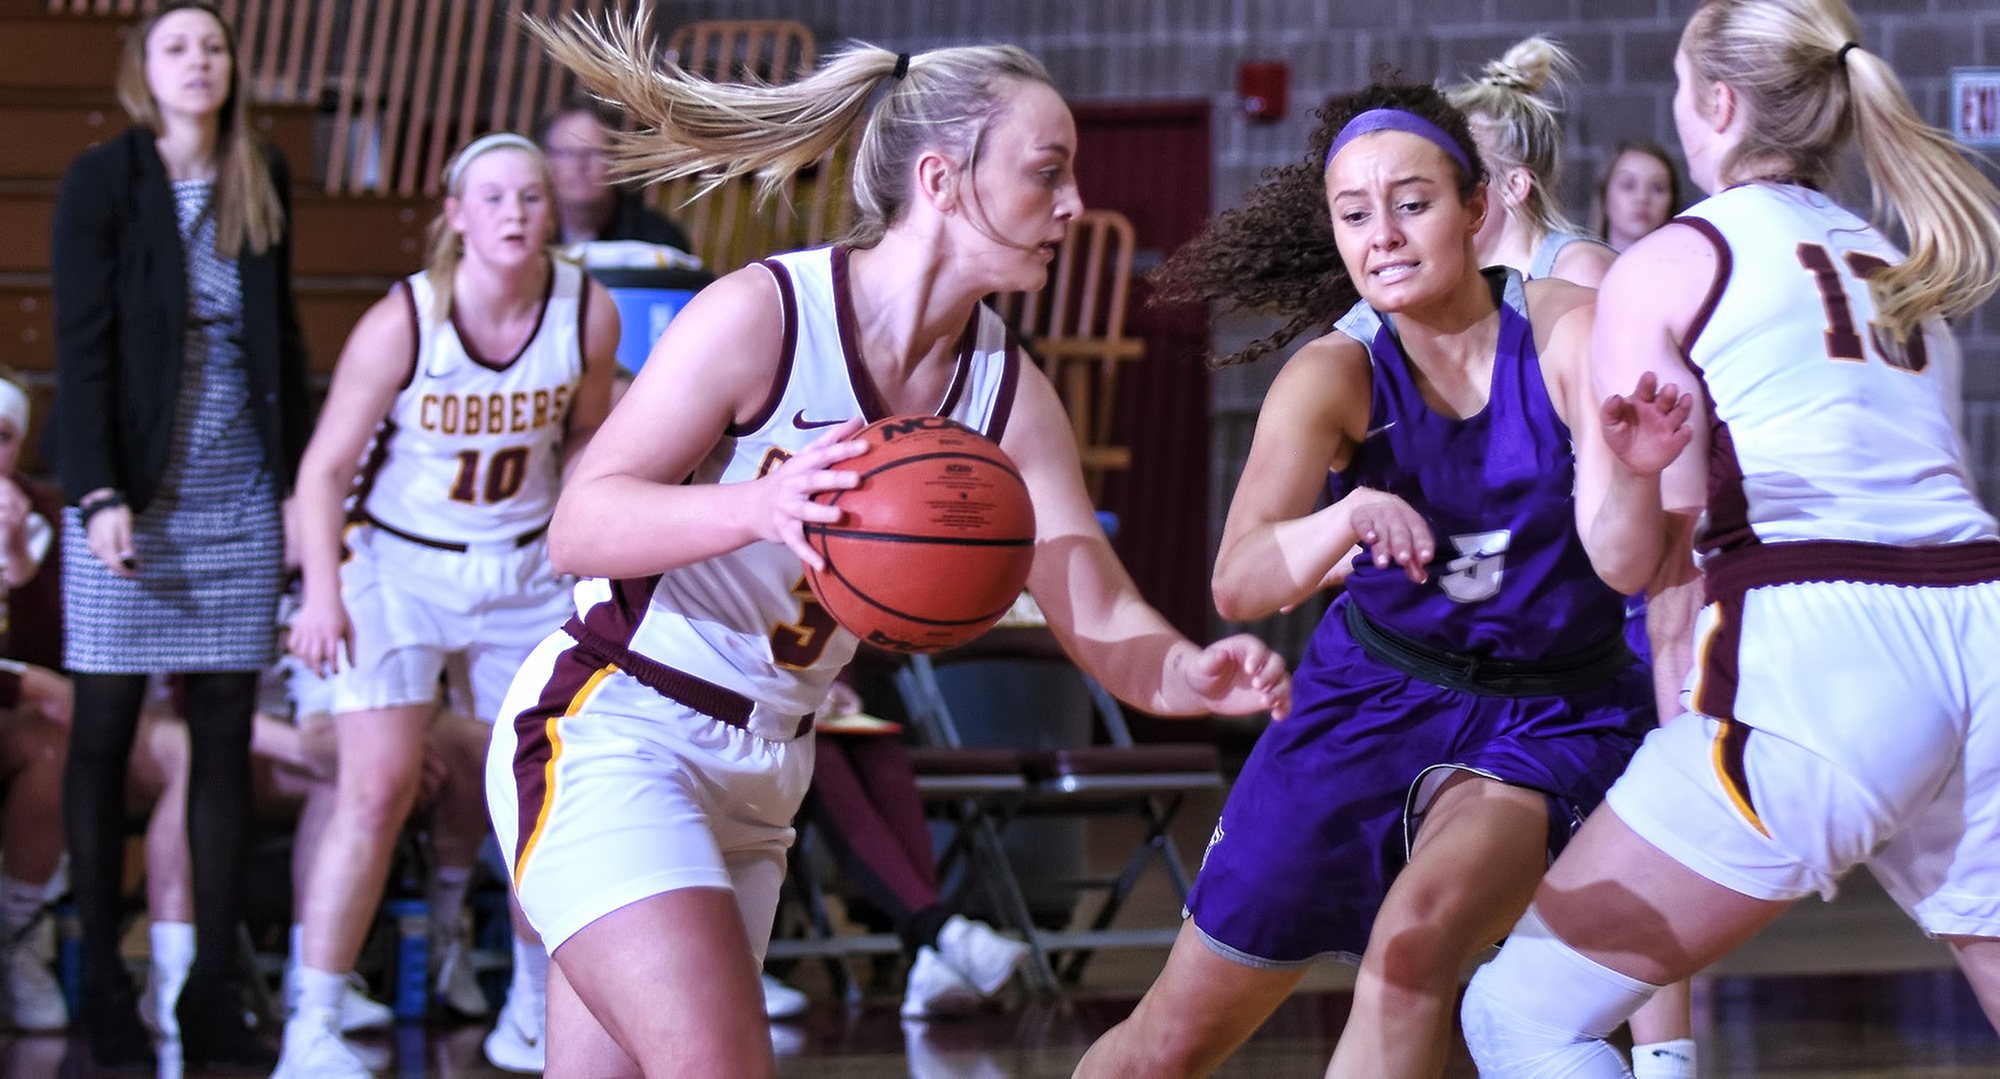 Sophomore Autumn Thompson had a career-high 23 points in the Cobbers' game at St. Catherine.